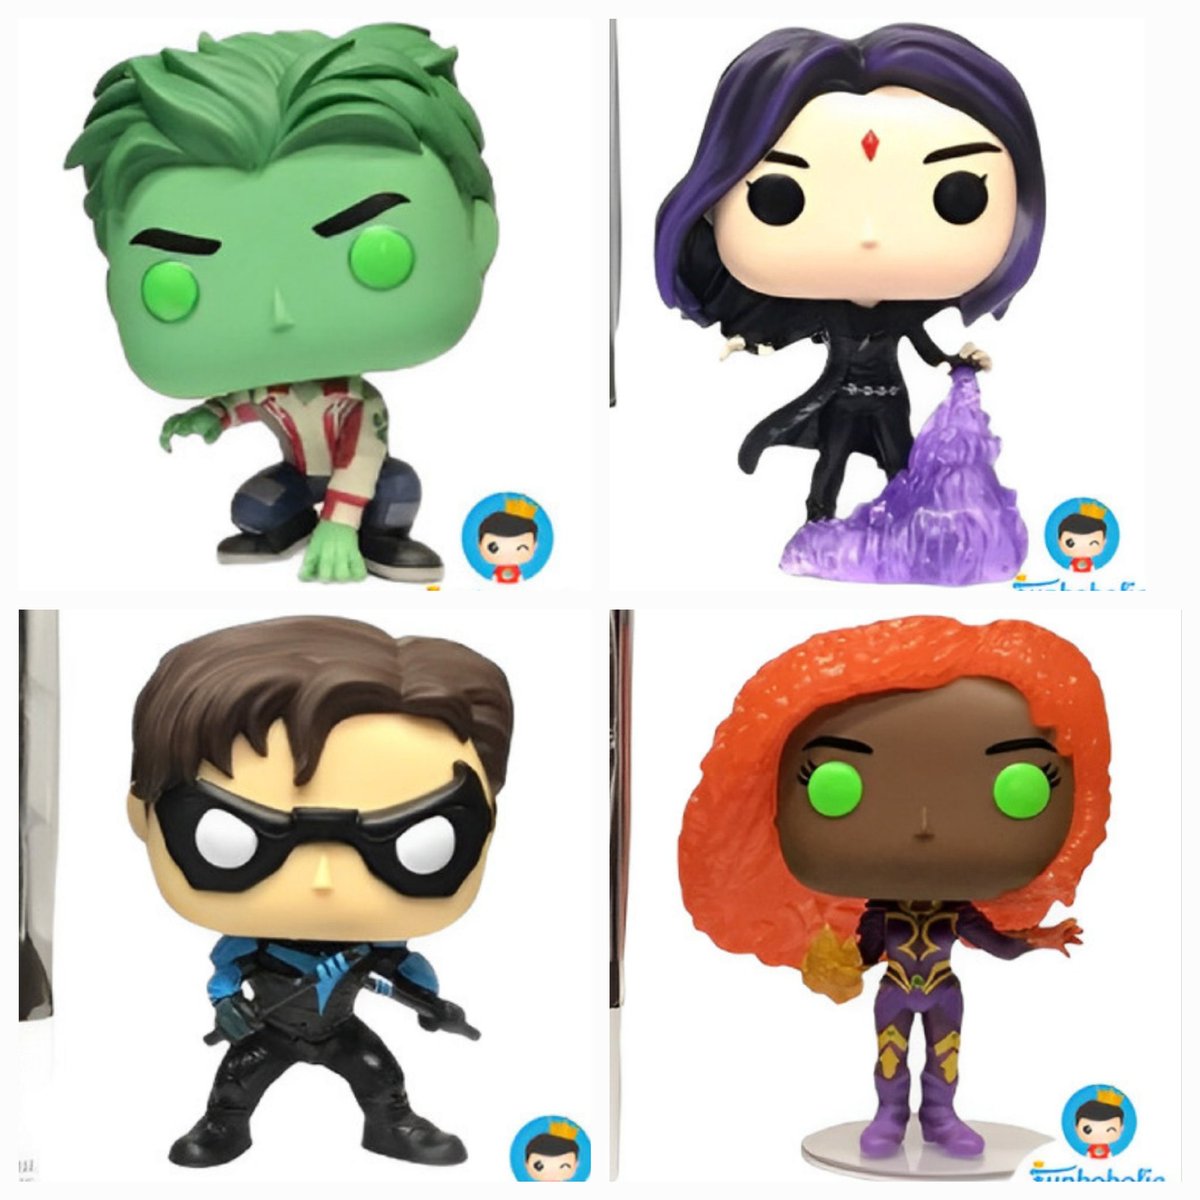 Finally Some actual funko Pop For DC Titans Series that Am So Looking Forward To get As Soon As They Become All Available LFG We Won ! ! ! !💯🔥🙌☺️

#DCTITANS #TeenTitans #Funko
#FunkoPops #FunkoPOPNews 
#DCU #DCComics #DcUniverse